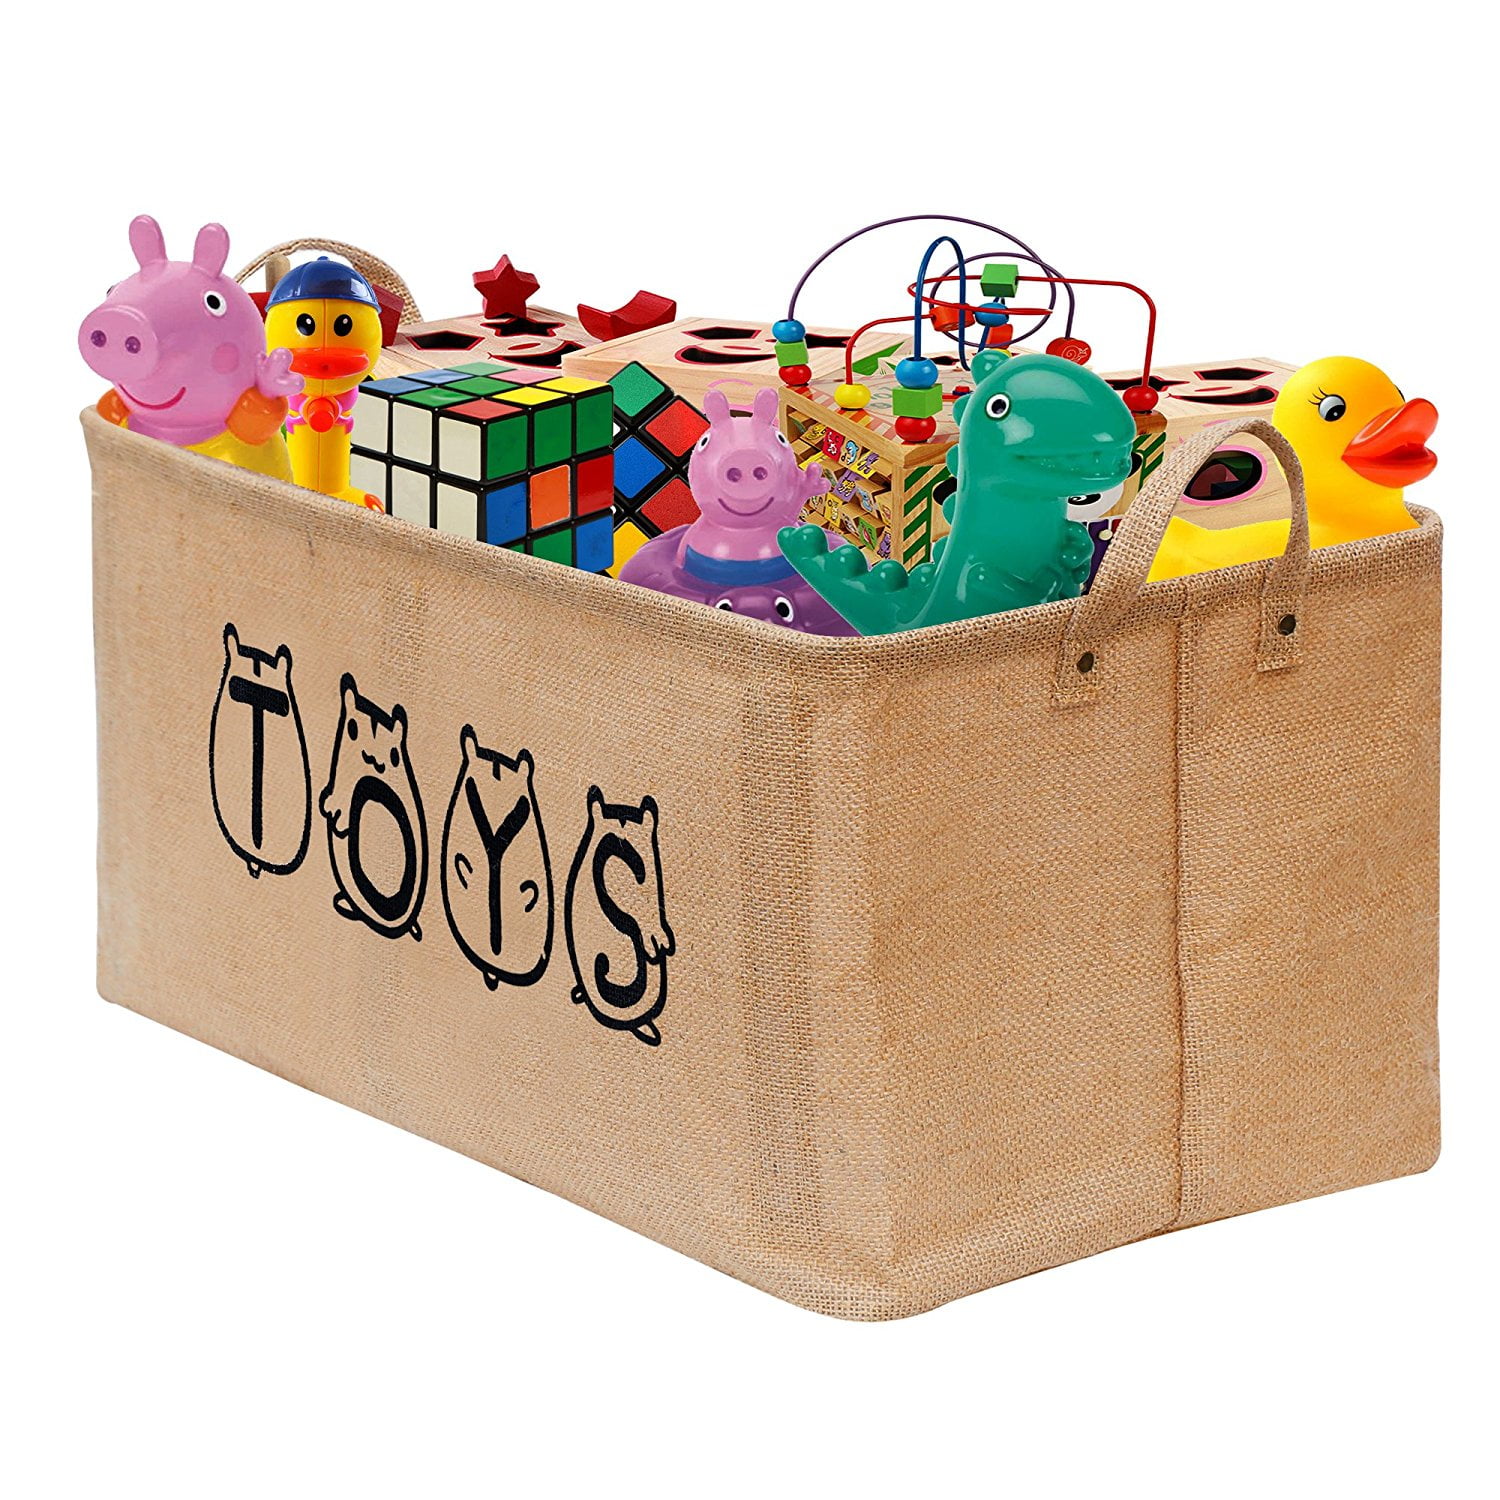 toy baskets for baby